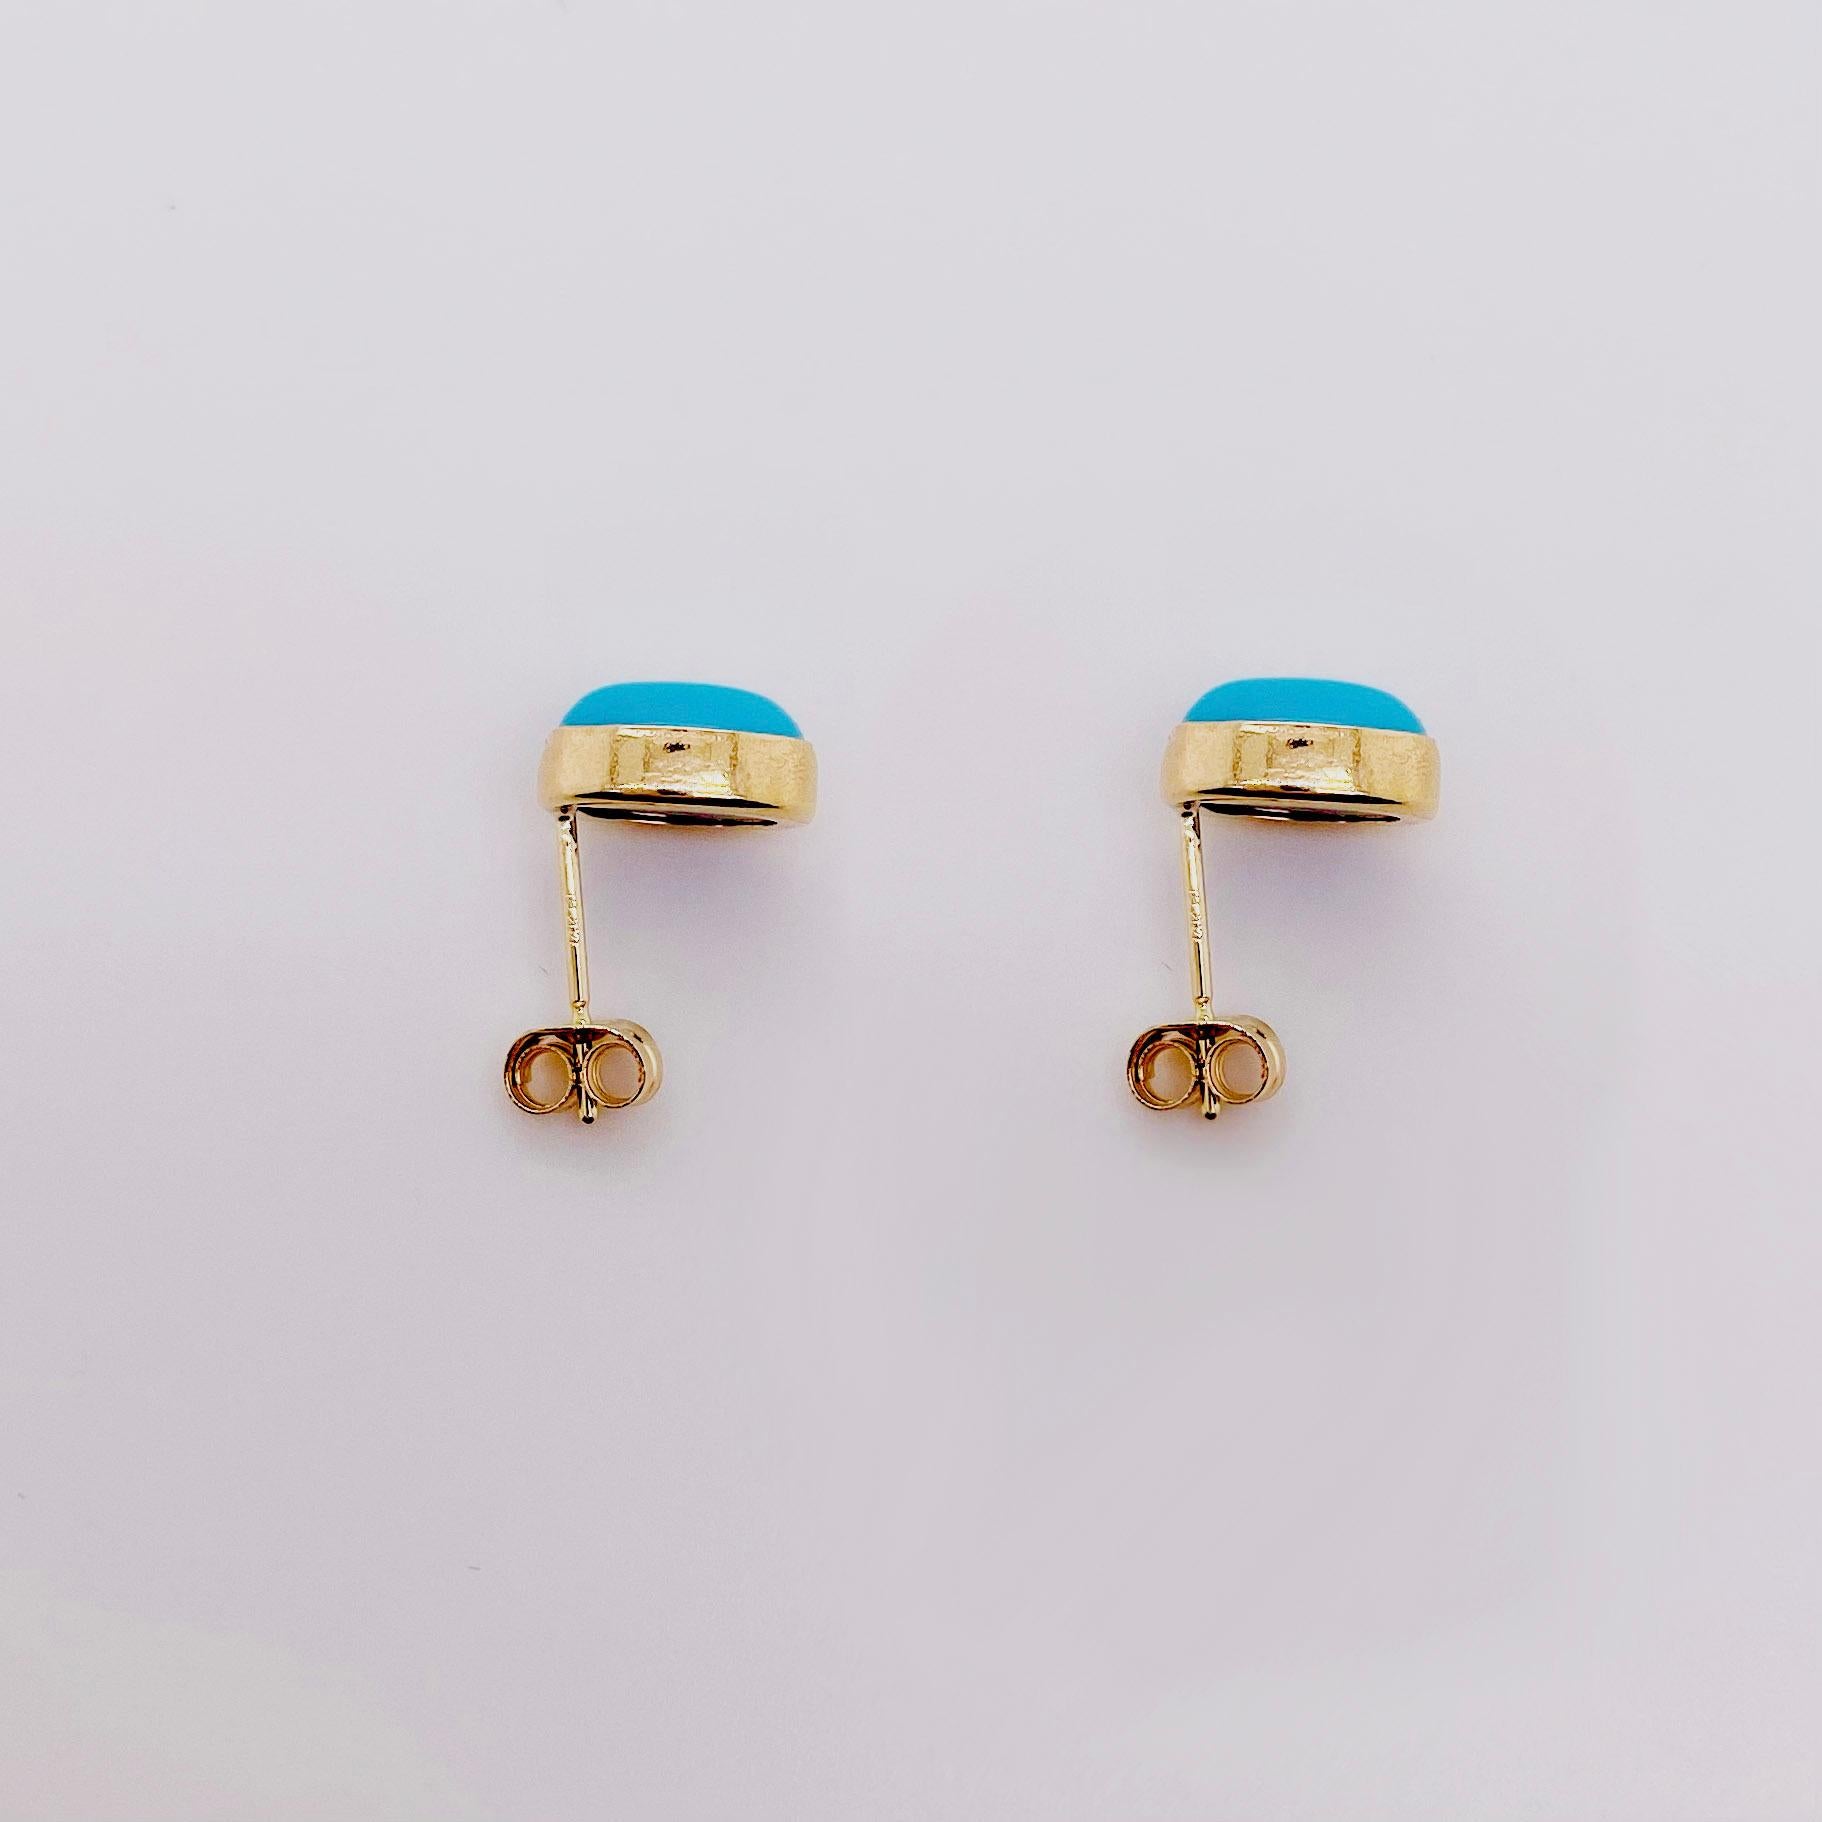 The details for these gorgeous earrings are listed below:
Metal Quality: 14 K Yellow Gold 
Earring Type: Stud 
Gemstone: Turquoise 
Gemstone Measurements: 7.7mm X 5.8 mm 
Gemstone Color: Blue 
Measurements: 8.3mm X 6.3 mm 
Post Type: Stud 
Total